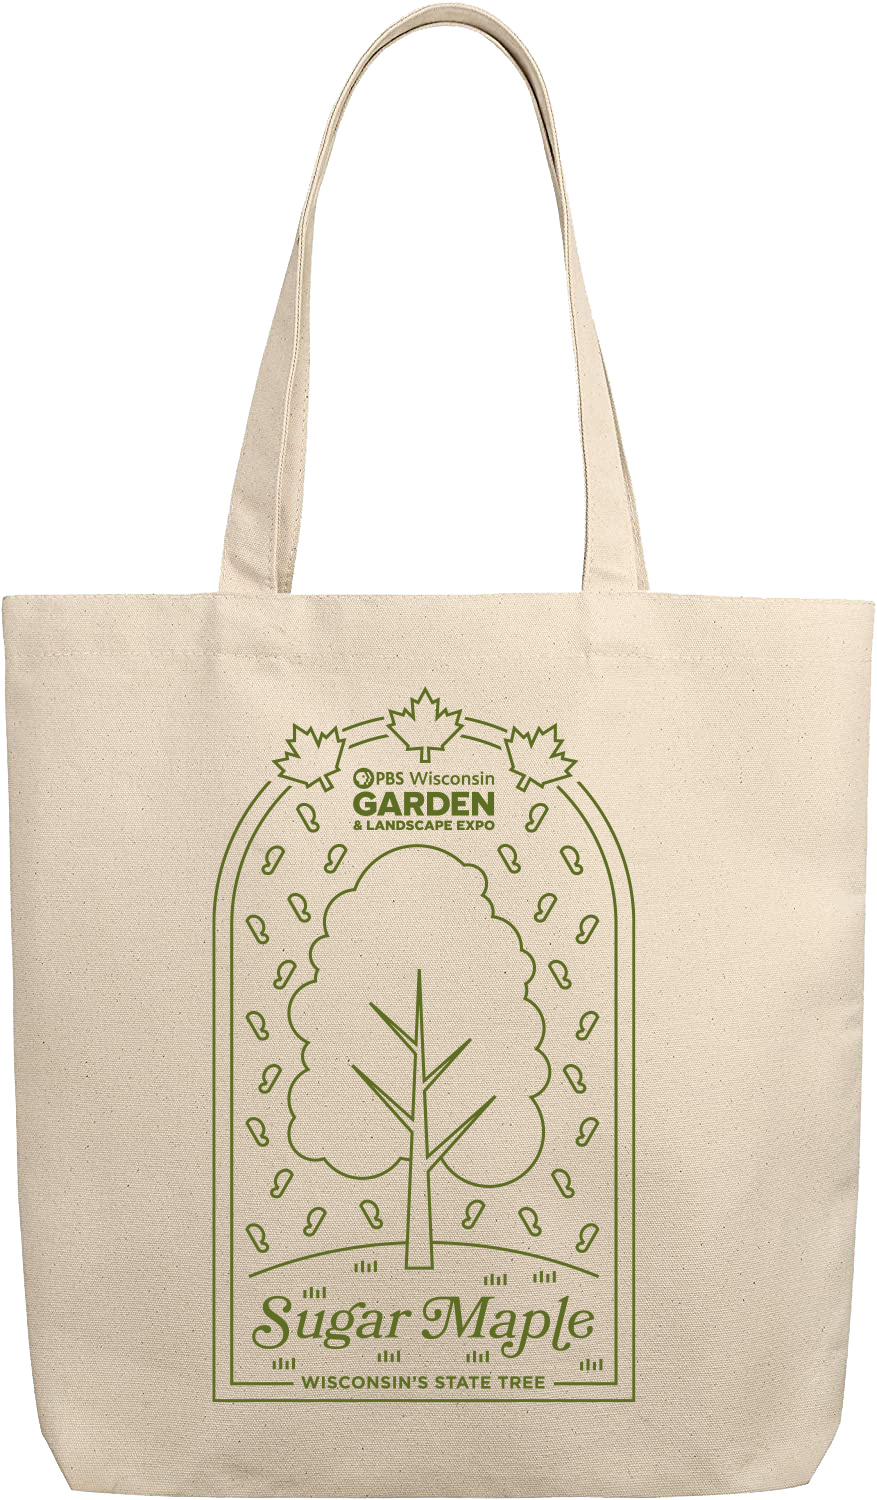 biege bag with green printed depiction of sugar maple tree 